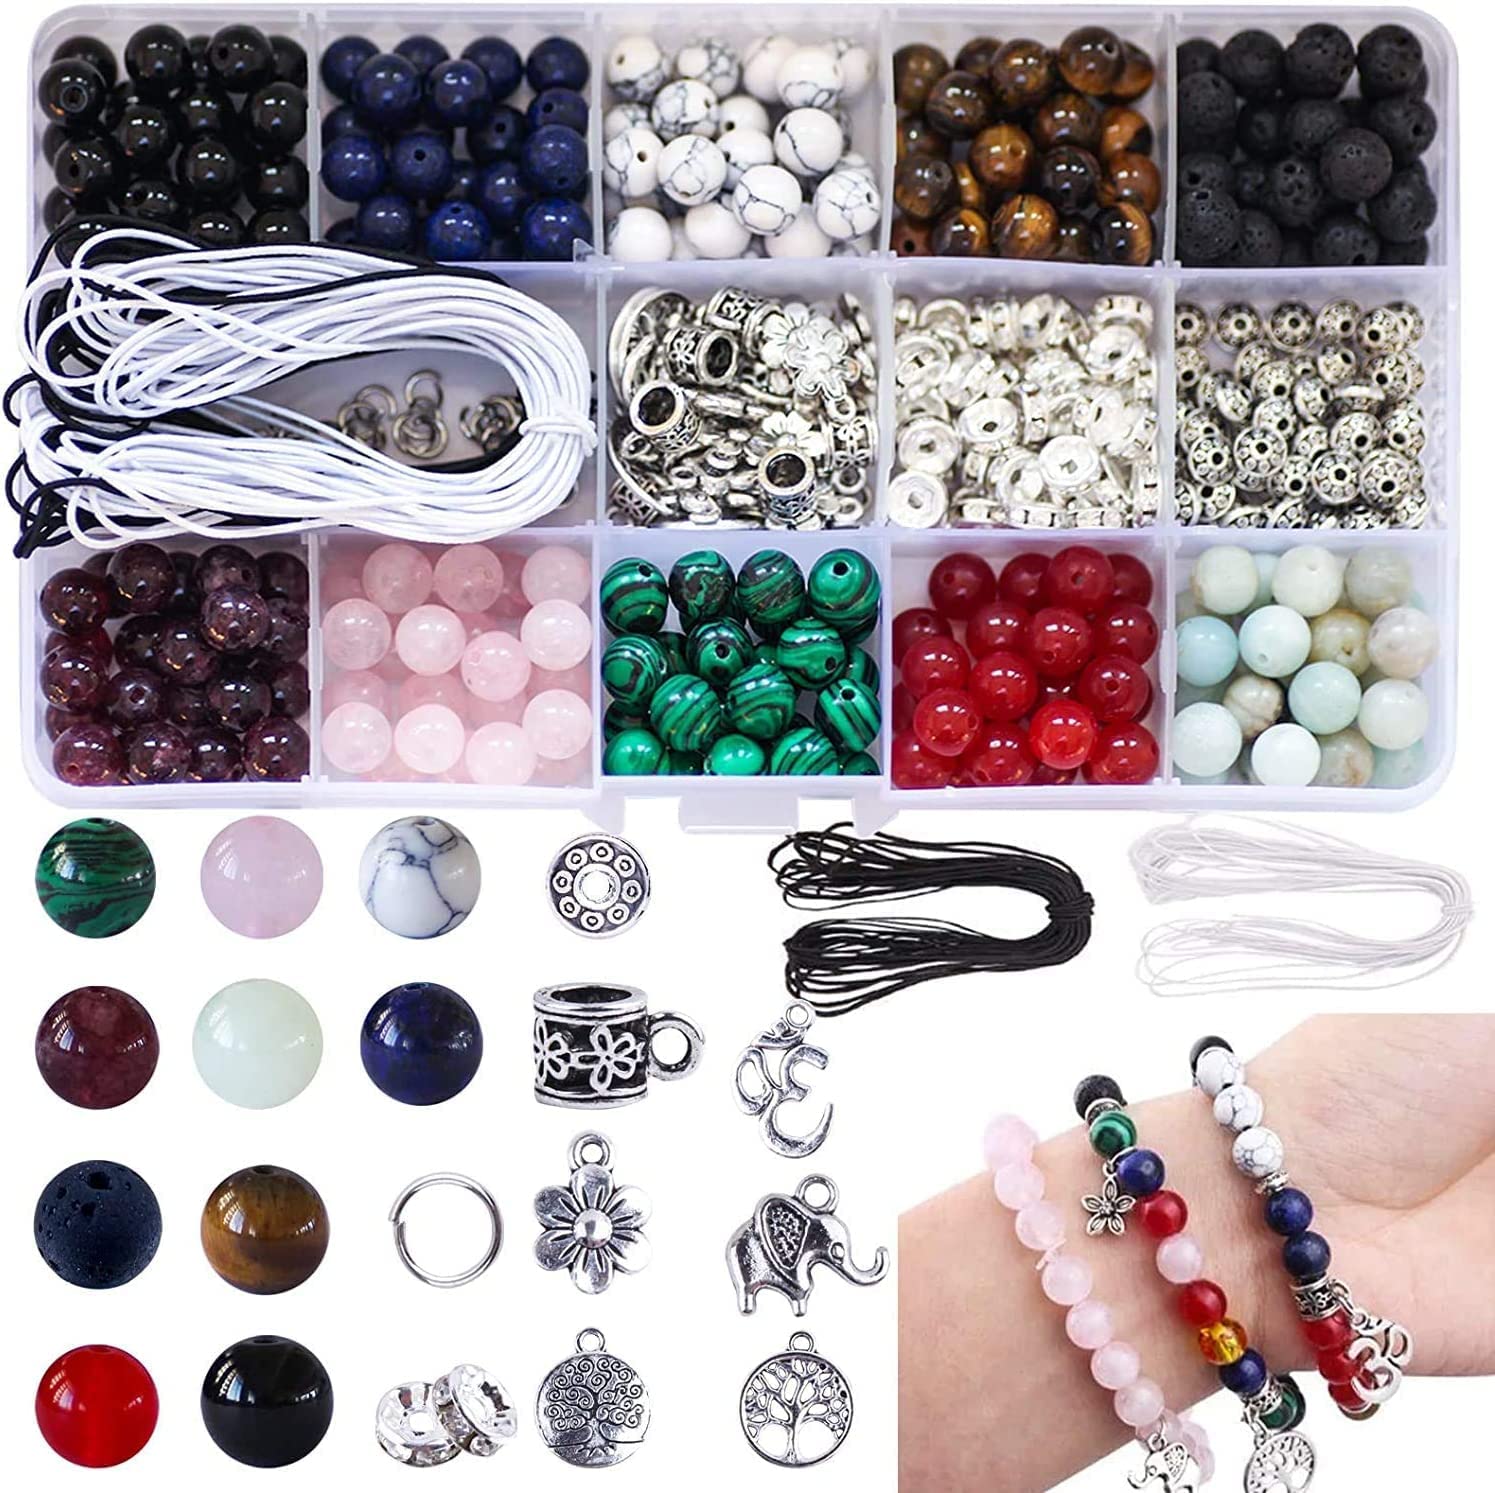 Fishdown 480 PCS Polymer Clay Beads for Jewelry Making Kit，24 Color Flower  Clay Charms for Bracelets,Fruit Smiley Face Beads,Cute Beads for Jewelry  Necklace Earring Making 